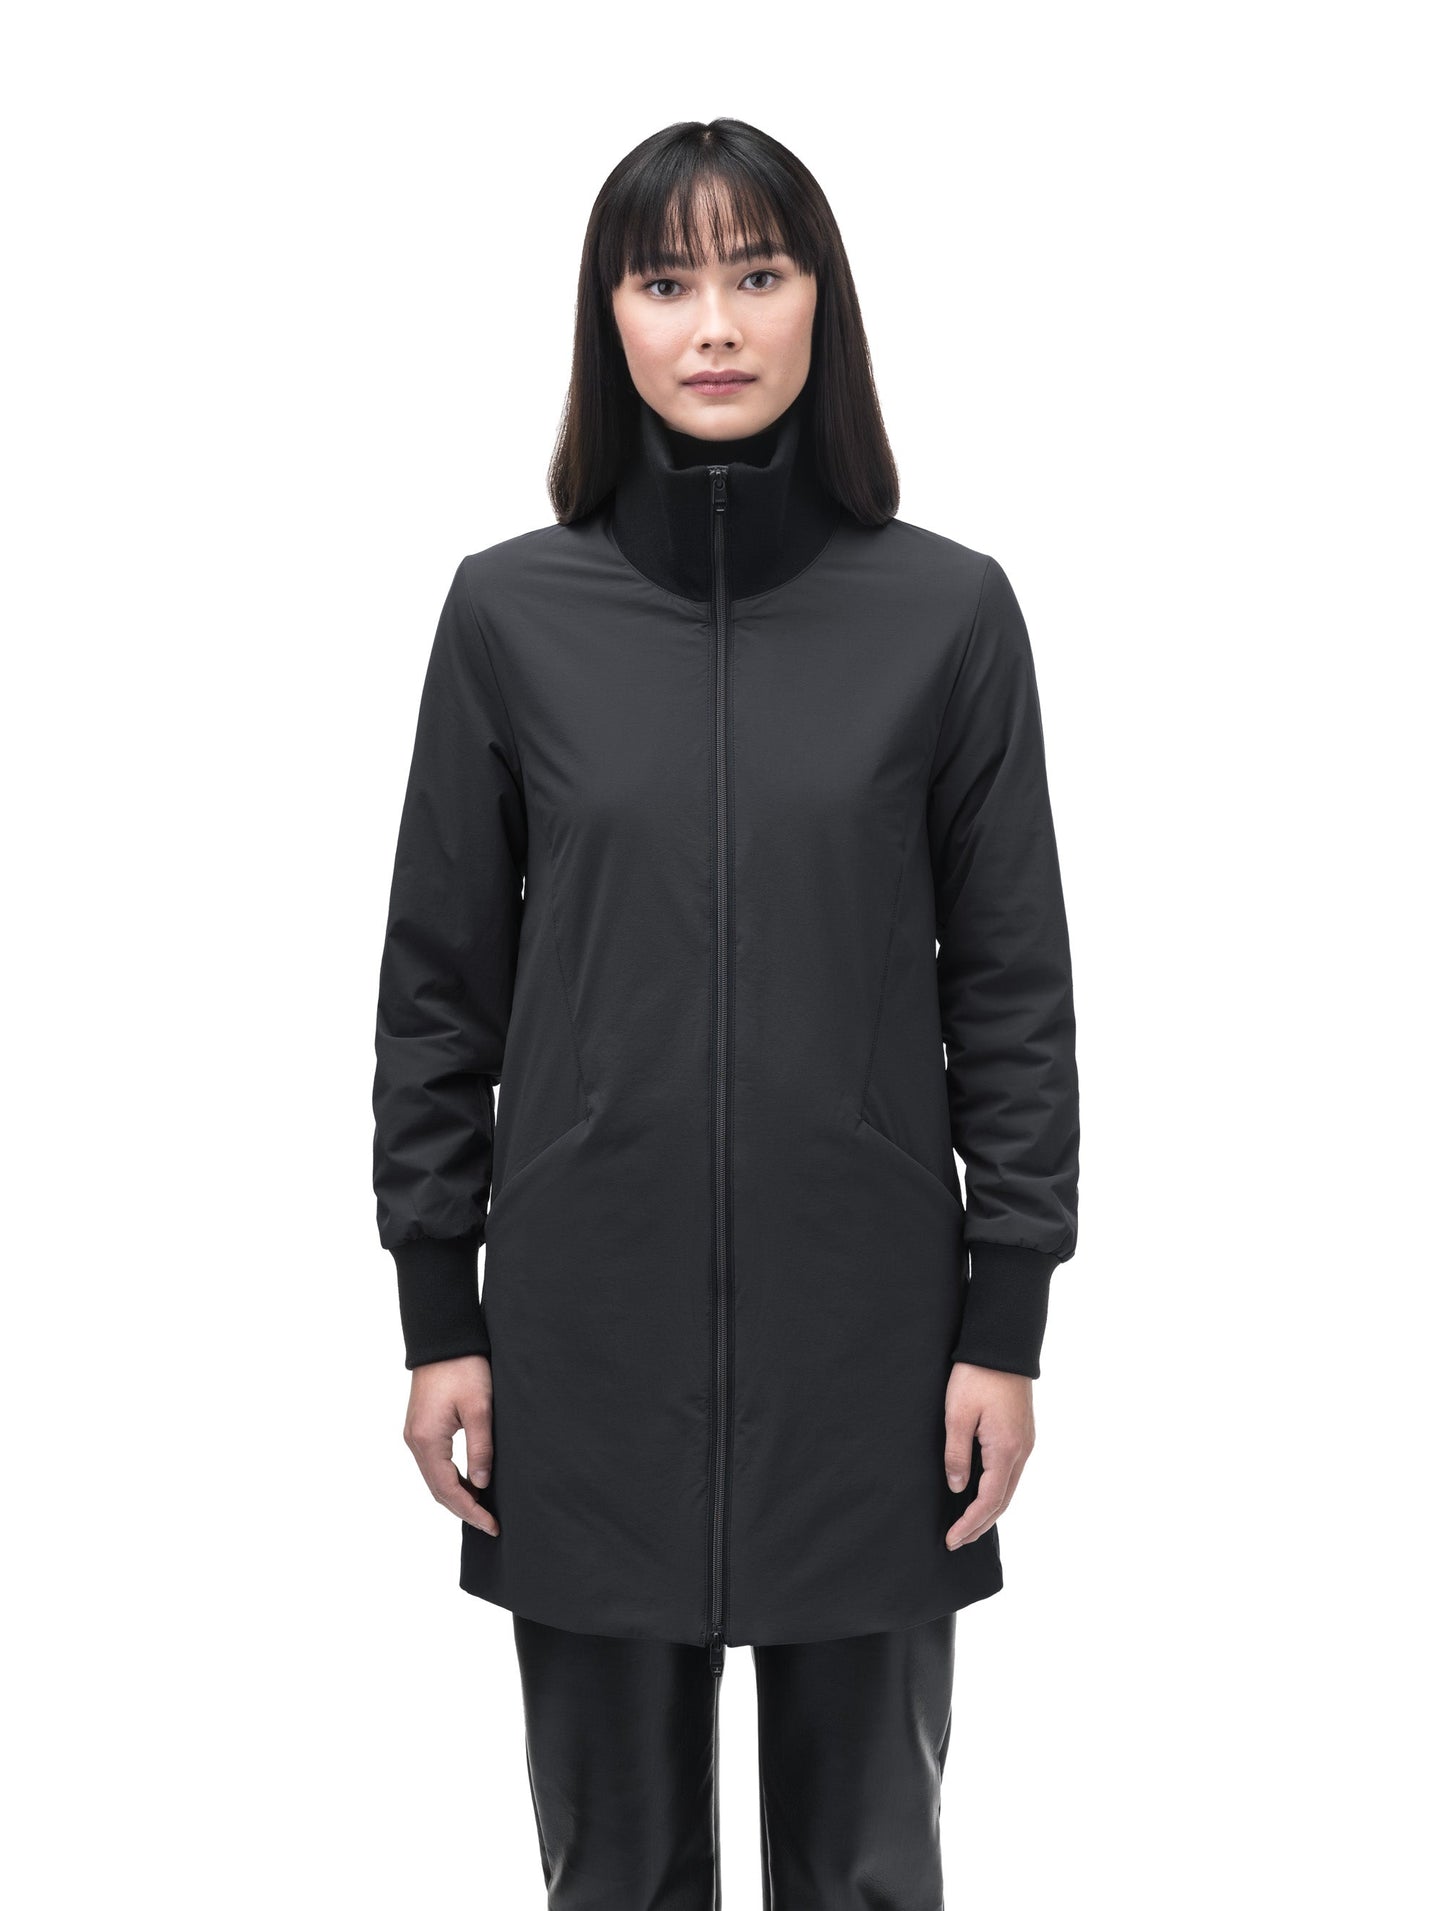 Mora Ladies Mid Layer Rib Neck Jacket in thigh length, Primaloft insulation, ribbing at collar and cuffs, and two-way front zipper, in Black